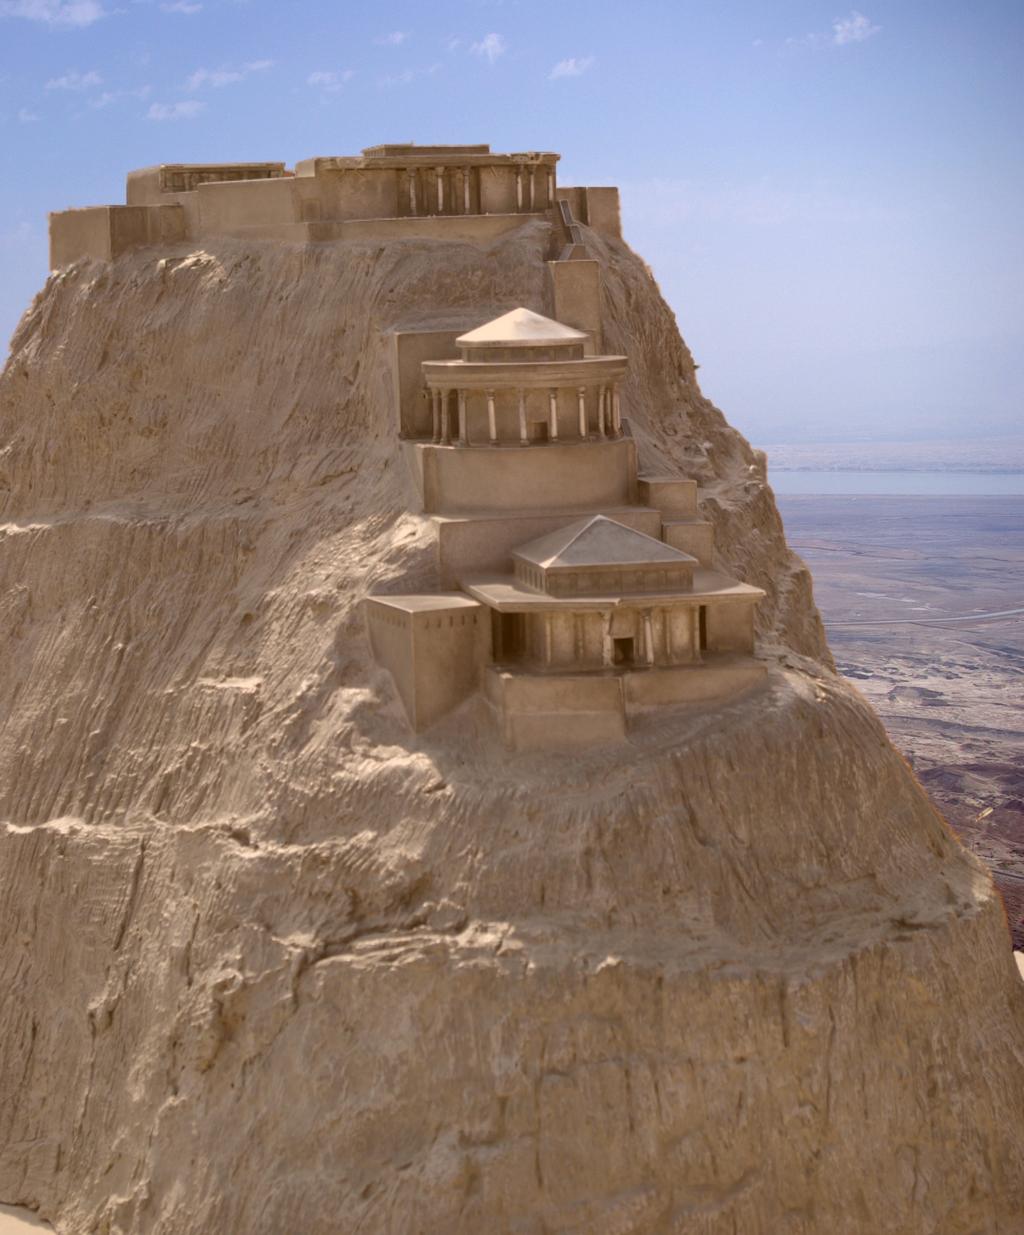 Wednesday, July 19: History and Nature Early wake up (tea/coffee and snack) Masada climb up via the Roman ramp, look over the Jordanian mountains and tour the sites that are a symbol of our people's